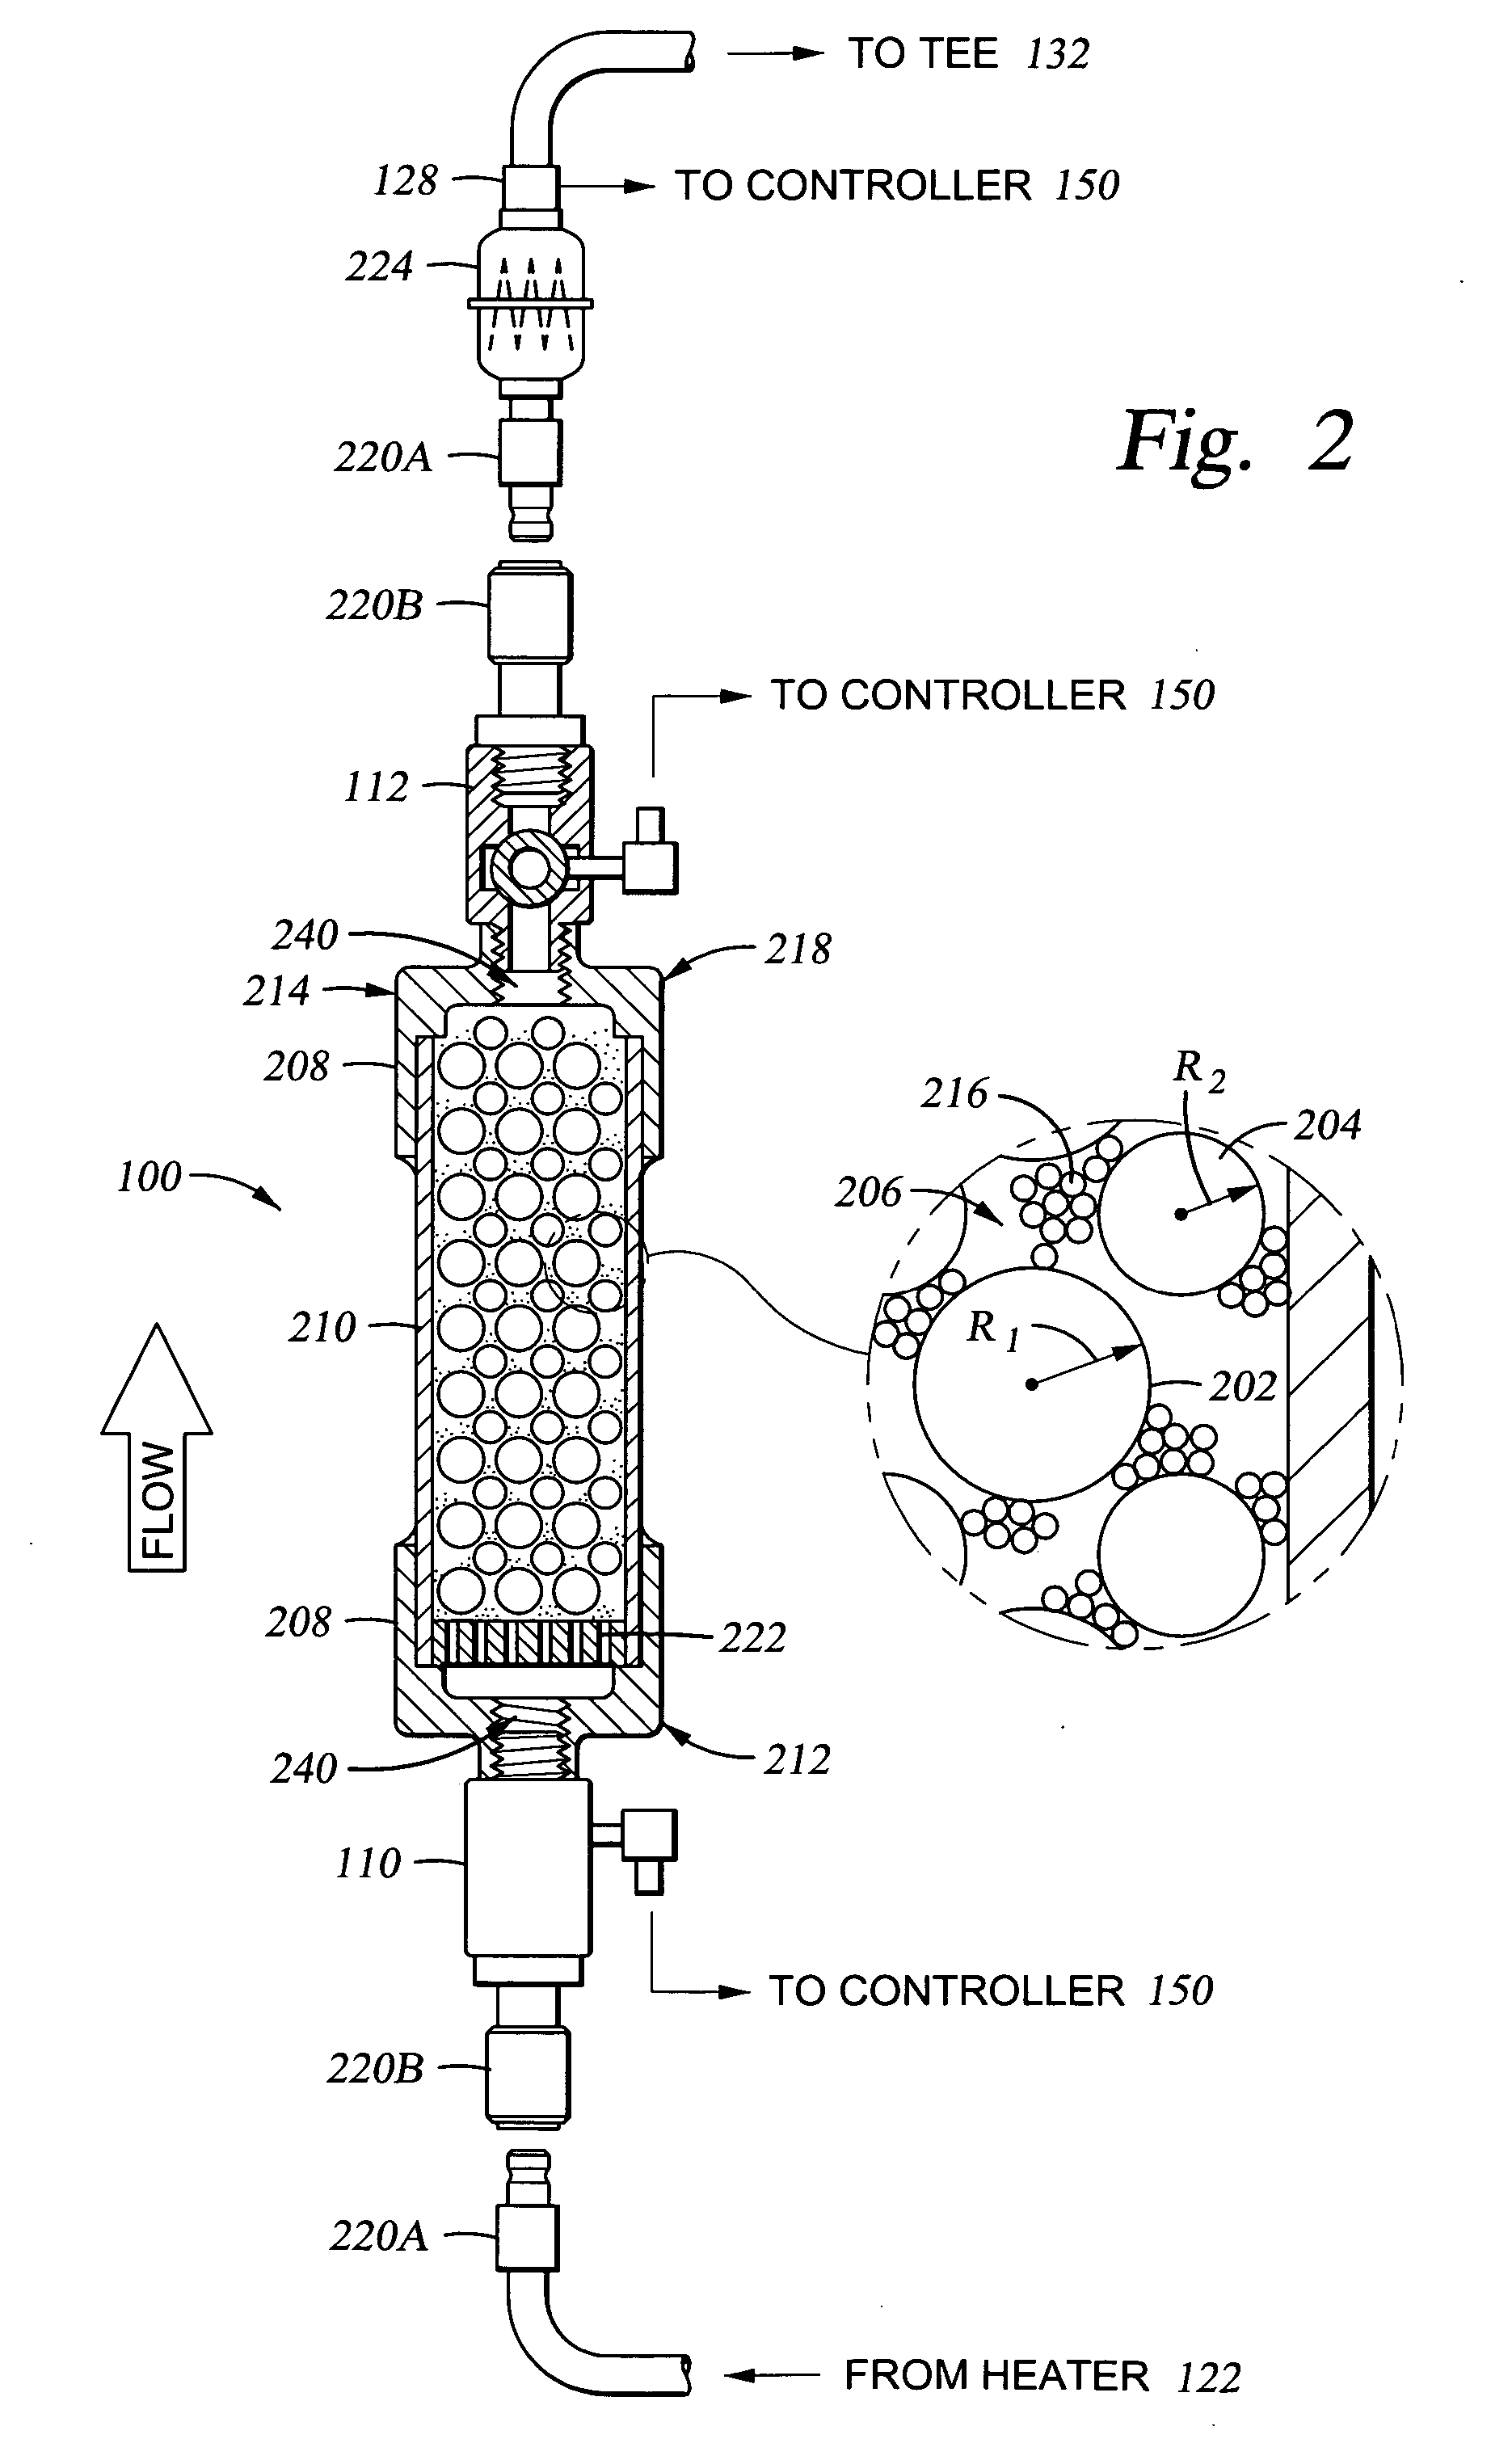 Method and apparatus for providing gas to a processing chamber